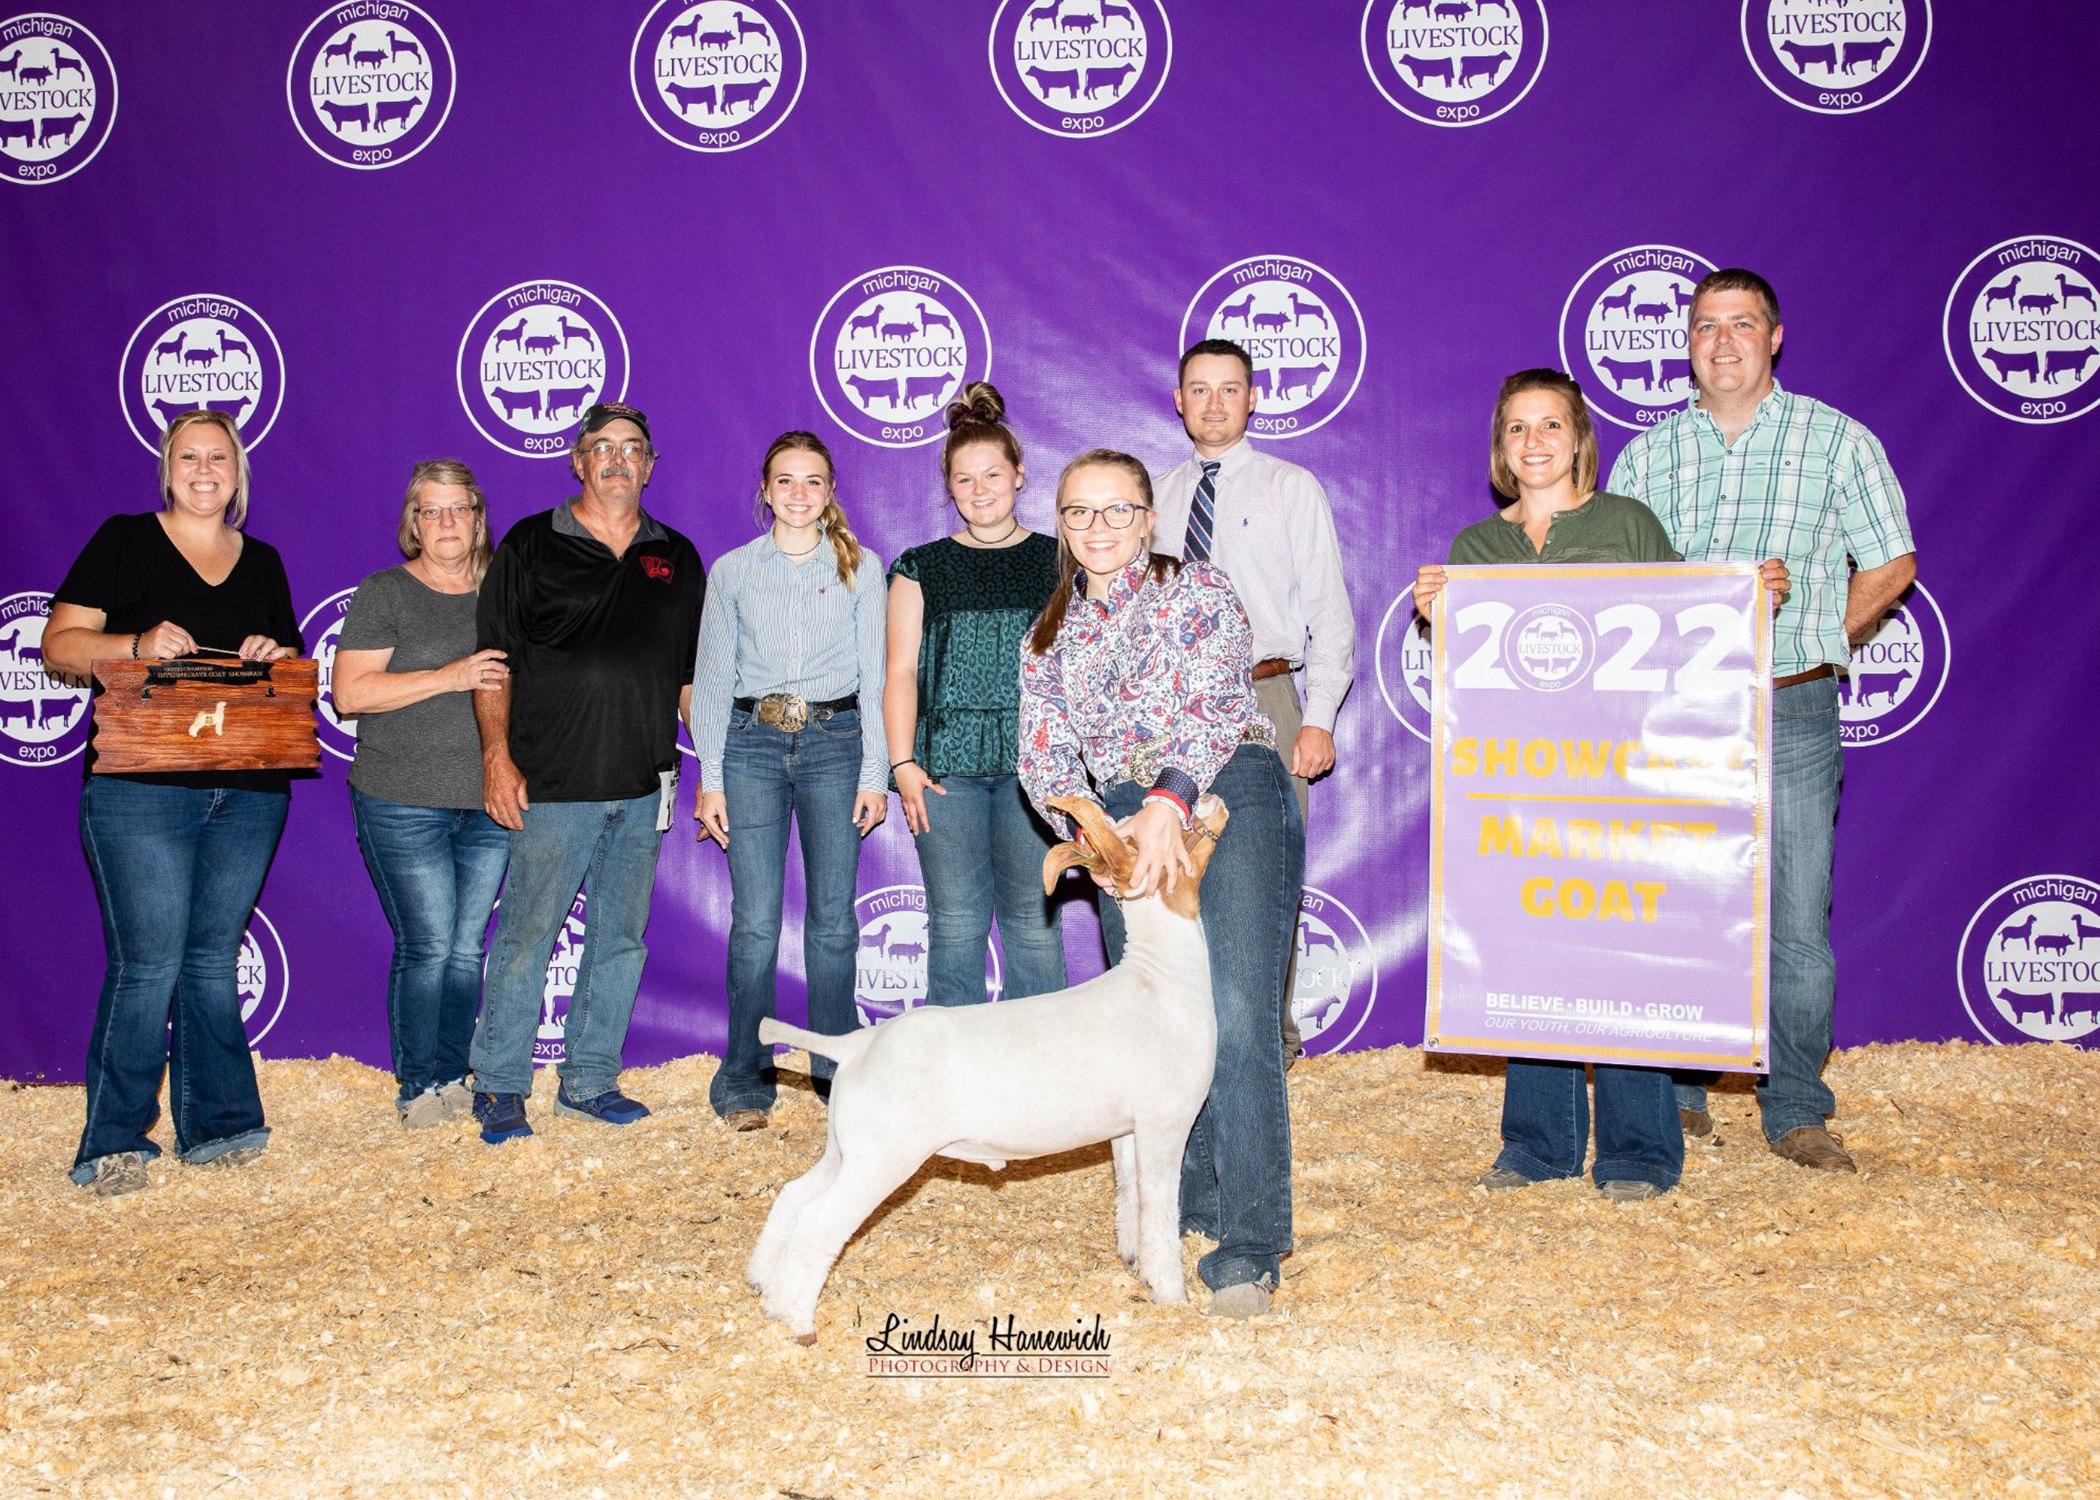 7th Overall Goat, 2022 MLE